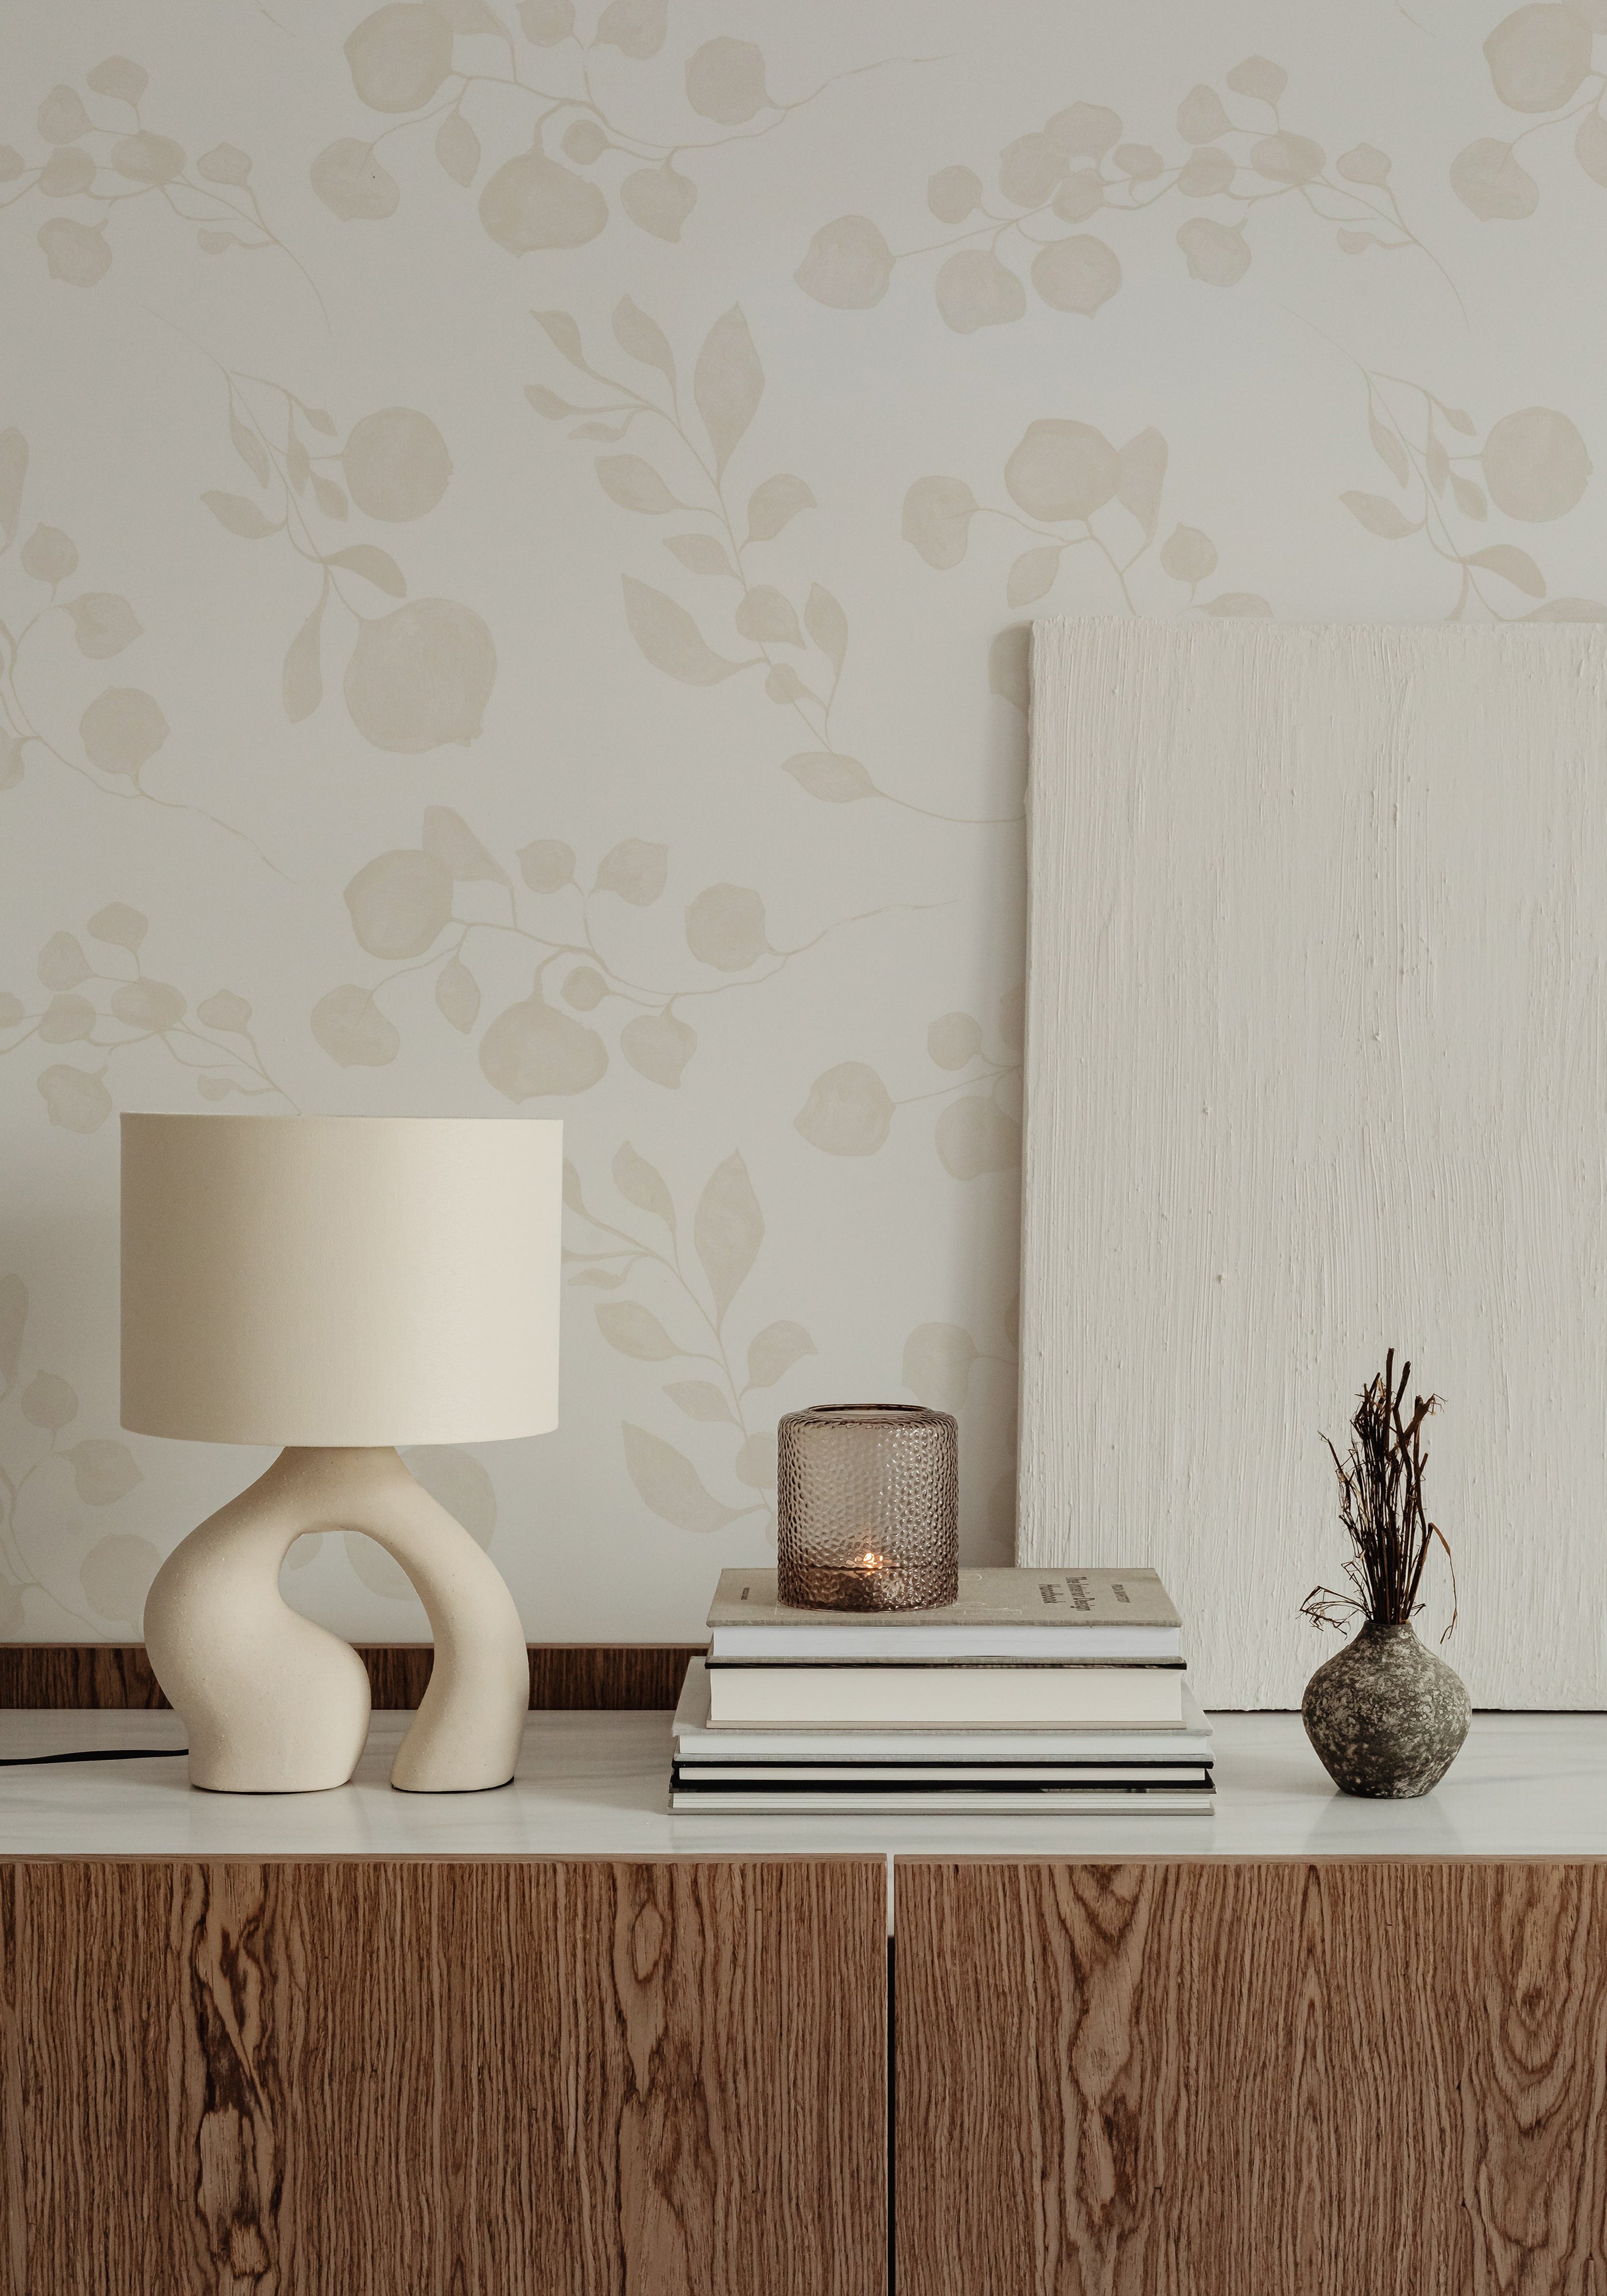 An elegantly styled room featuring the 'Subtle Botanique Wallpaper', with delicate beige botanical patterns over a light background, above a dark wood paneling. The decor includes a unique sculptural lamp on a wooden sideboard, adding to the room’s contemporary natural aesthetic.